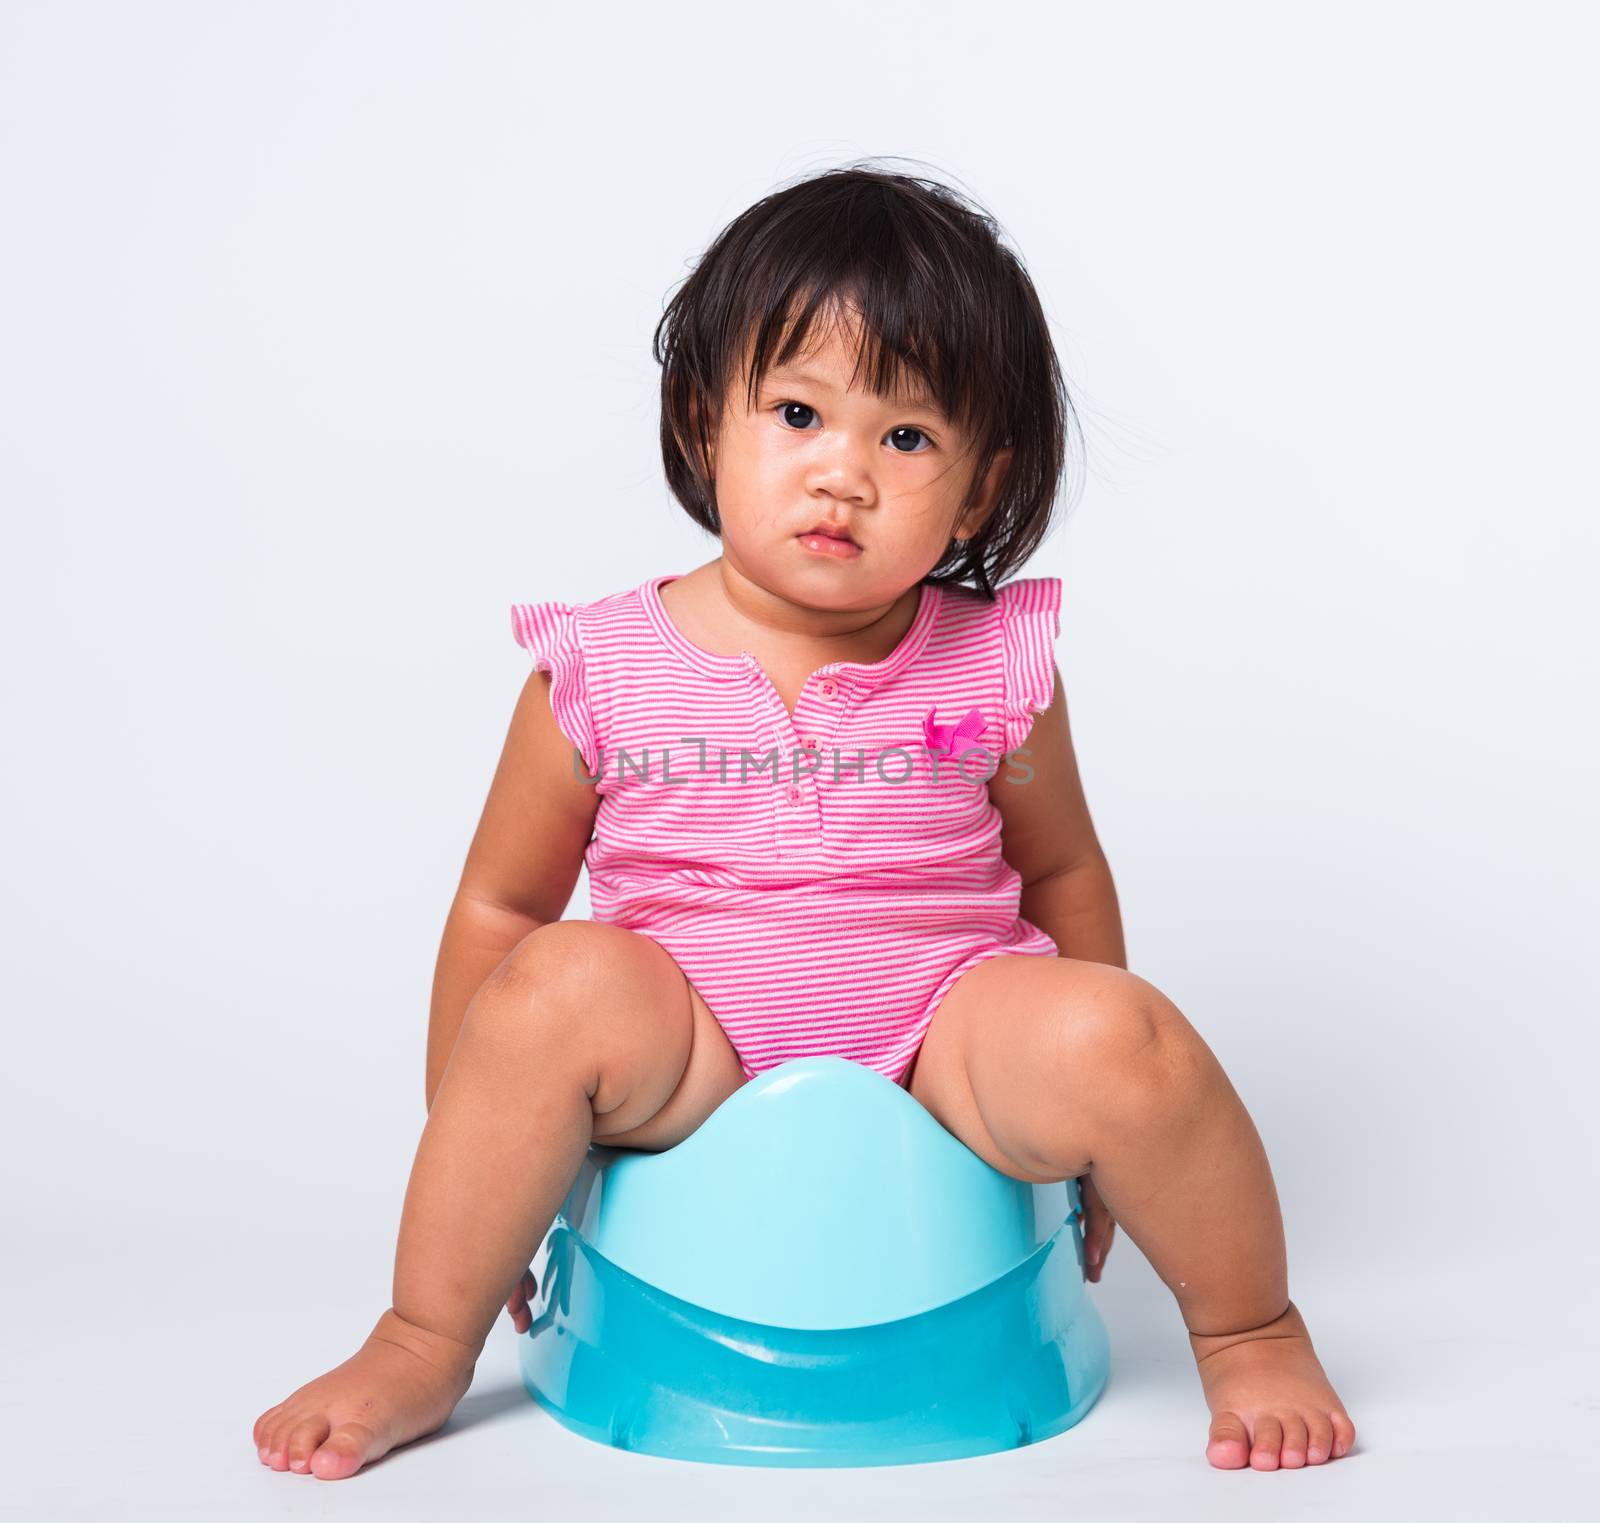 Asian little cute baby child girl education training to sitting on blue chamber pot or potty in, studio shot isolated on white background, wc toilet concept